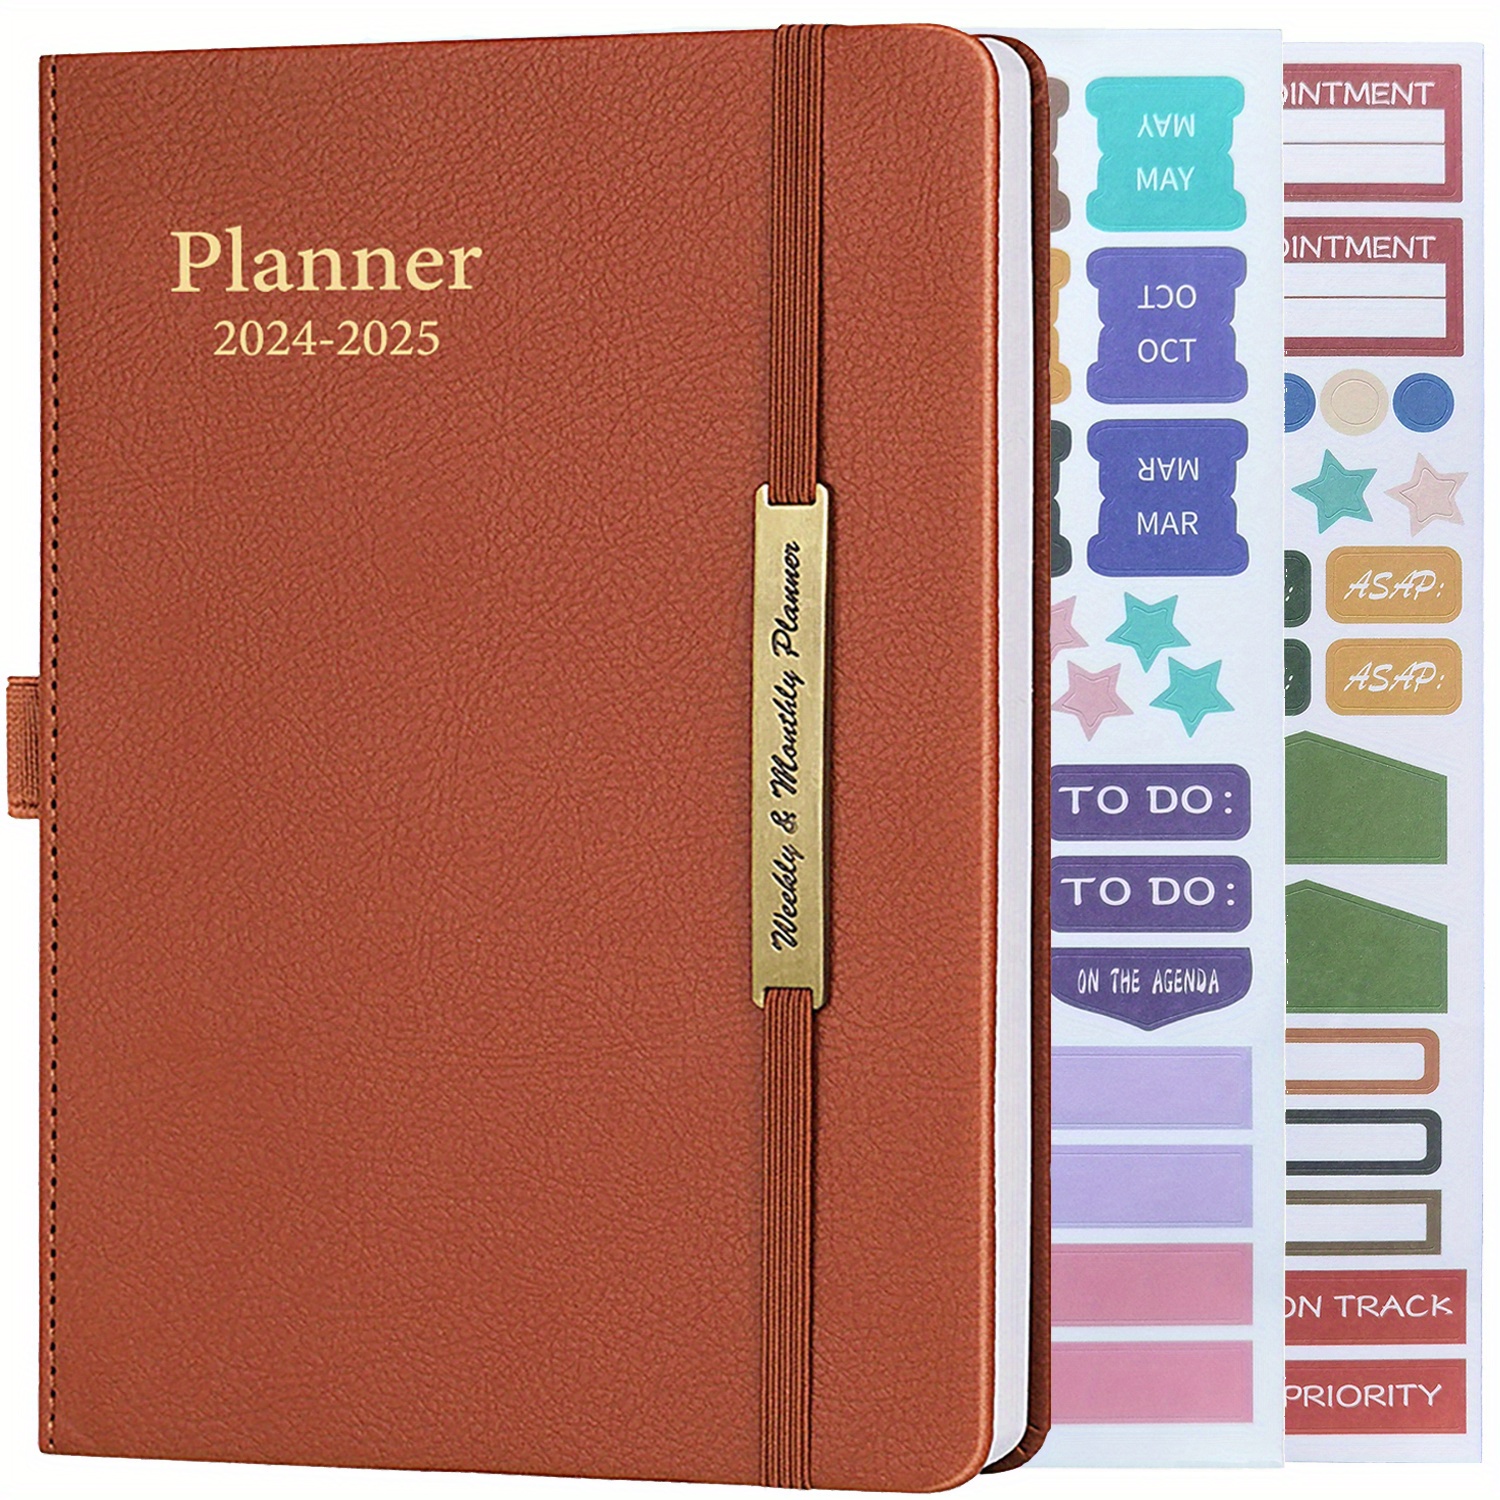 2024-2025 Planner 18 Months Weekly & Monthly Planners, Academic Year  Calendar ( January 2024 - June 2025 ) Agenda Notebook With Stickers, Inner